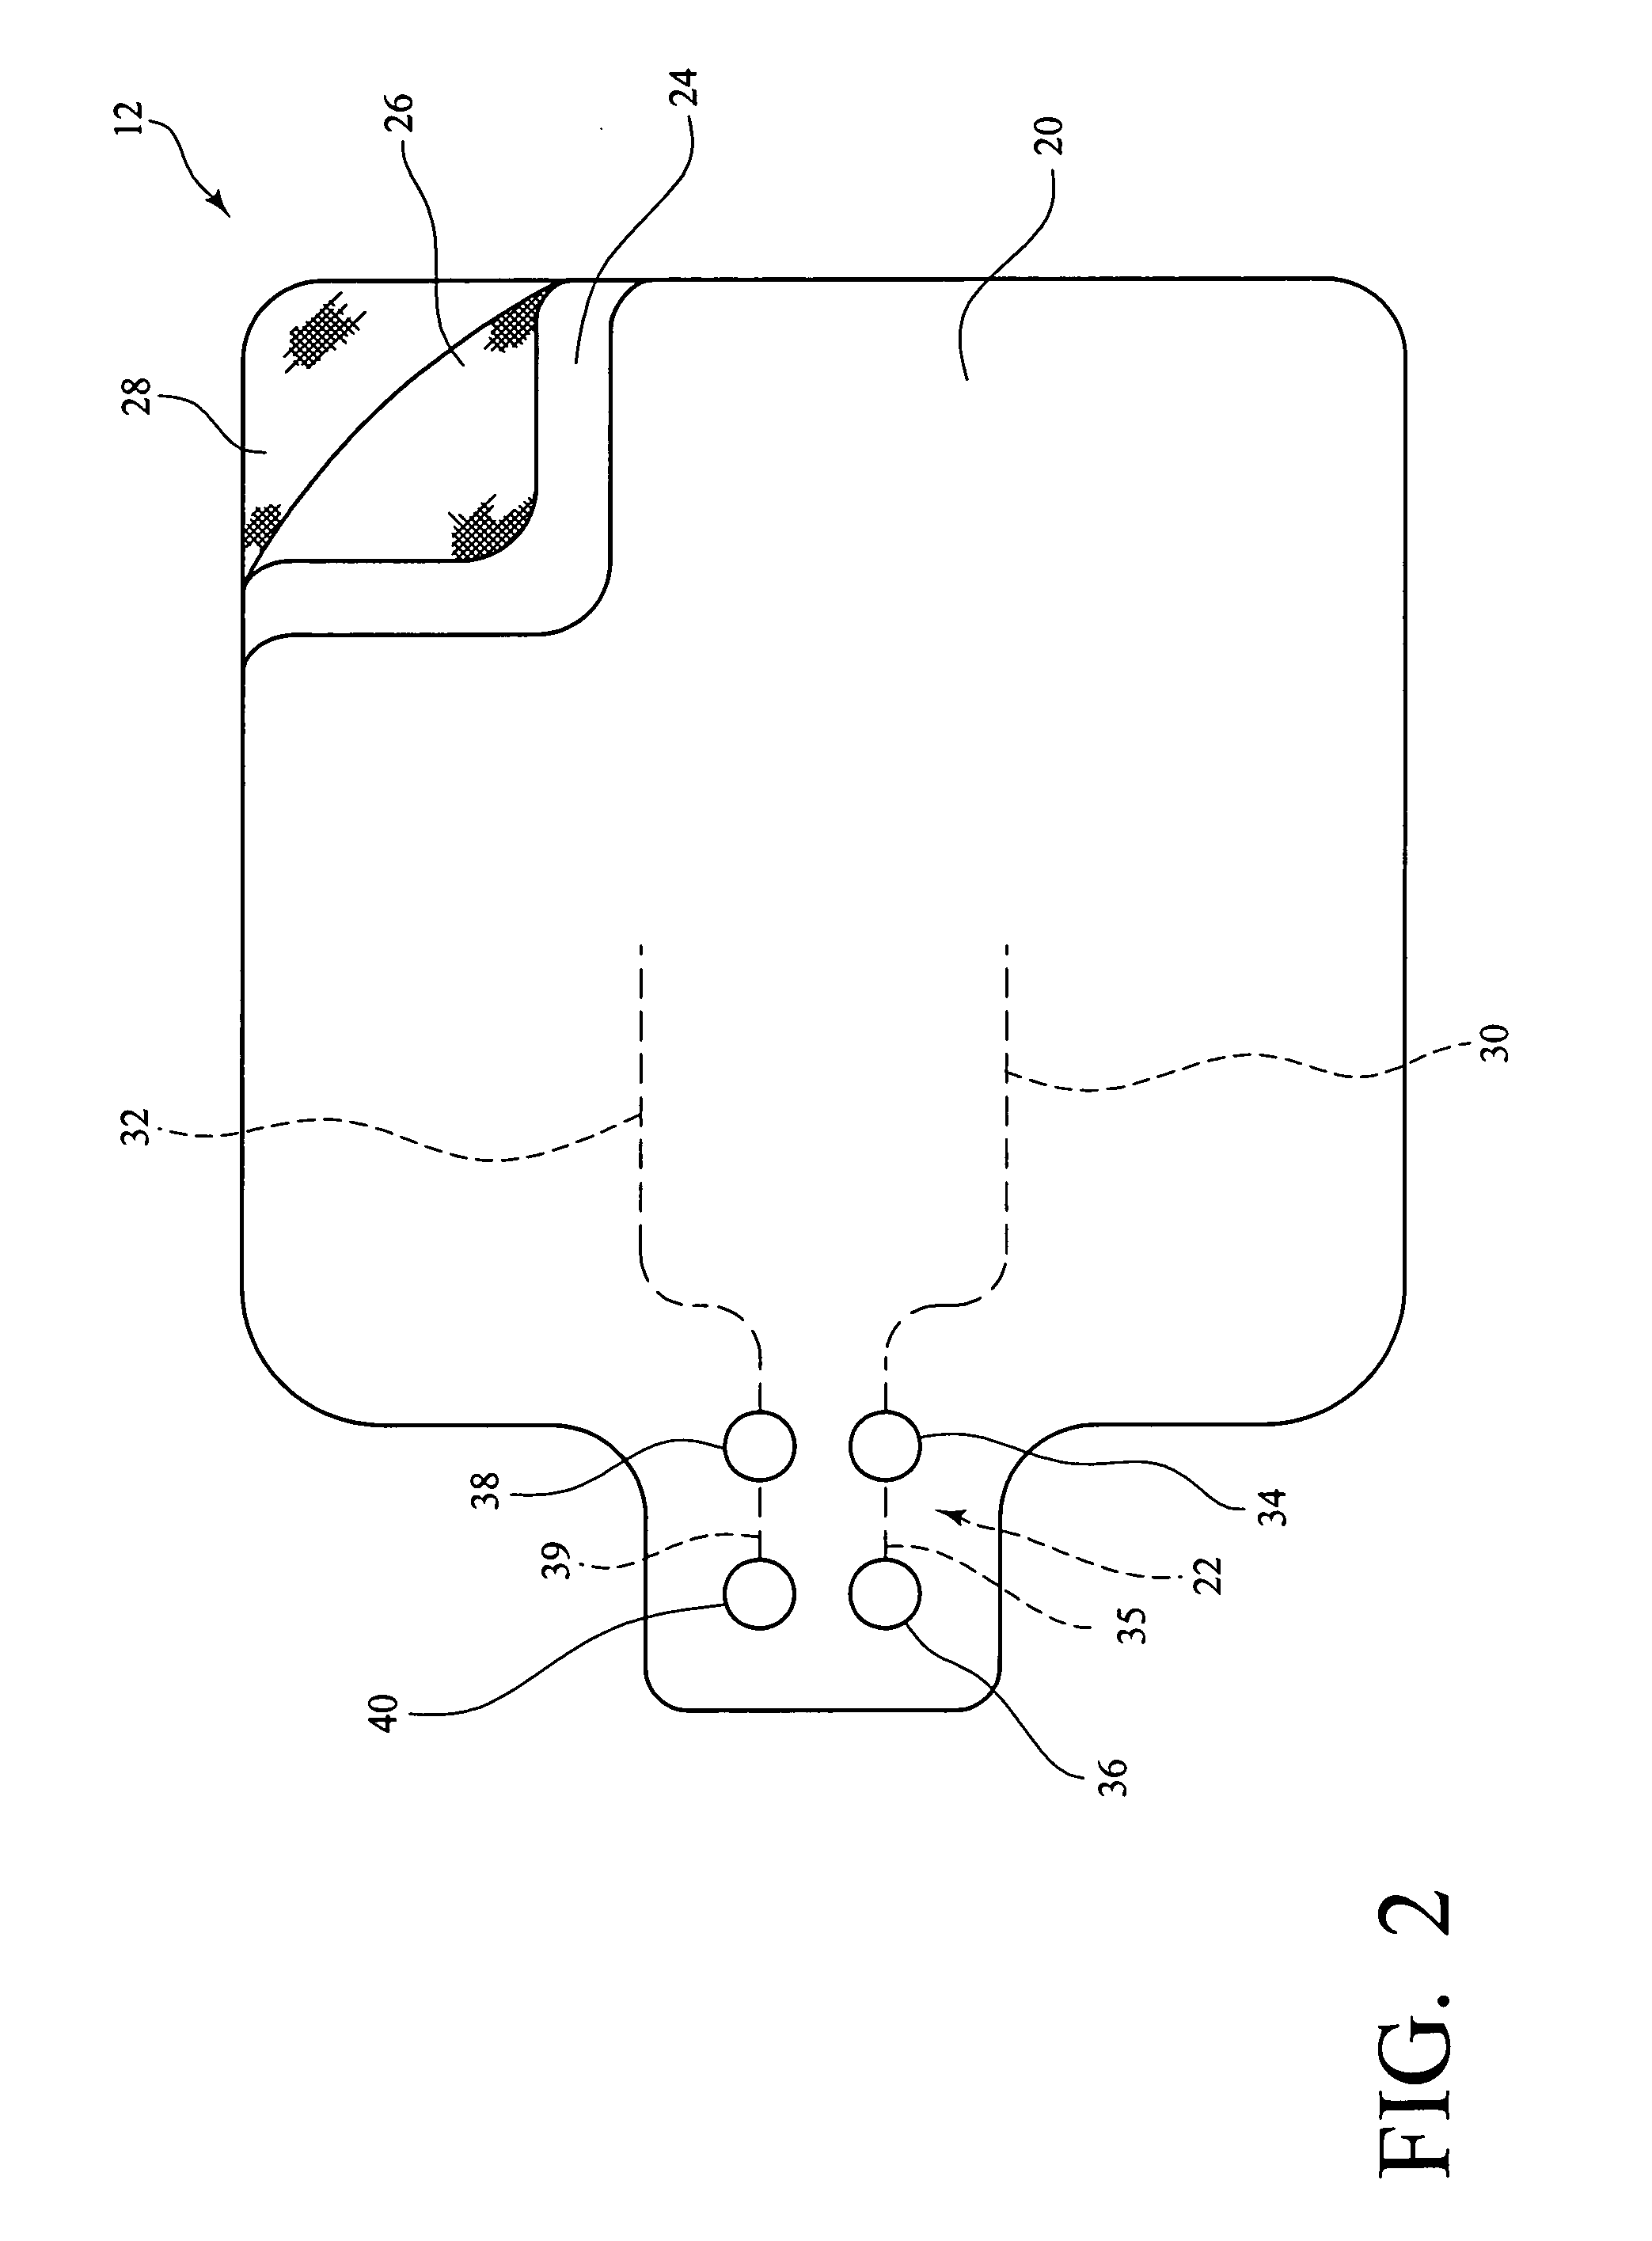 Apparatus for incontinence detection and notification